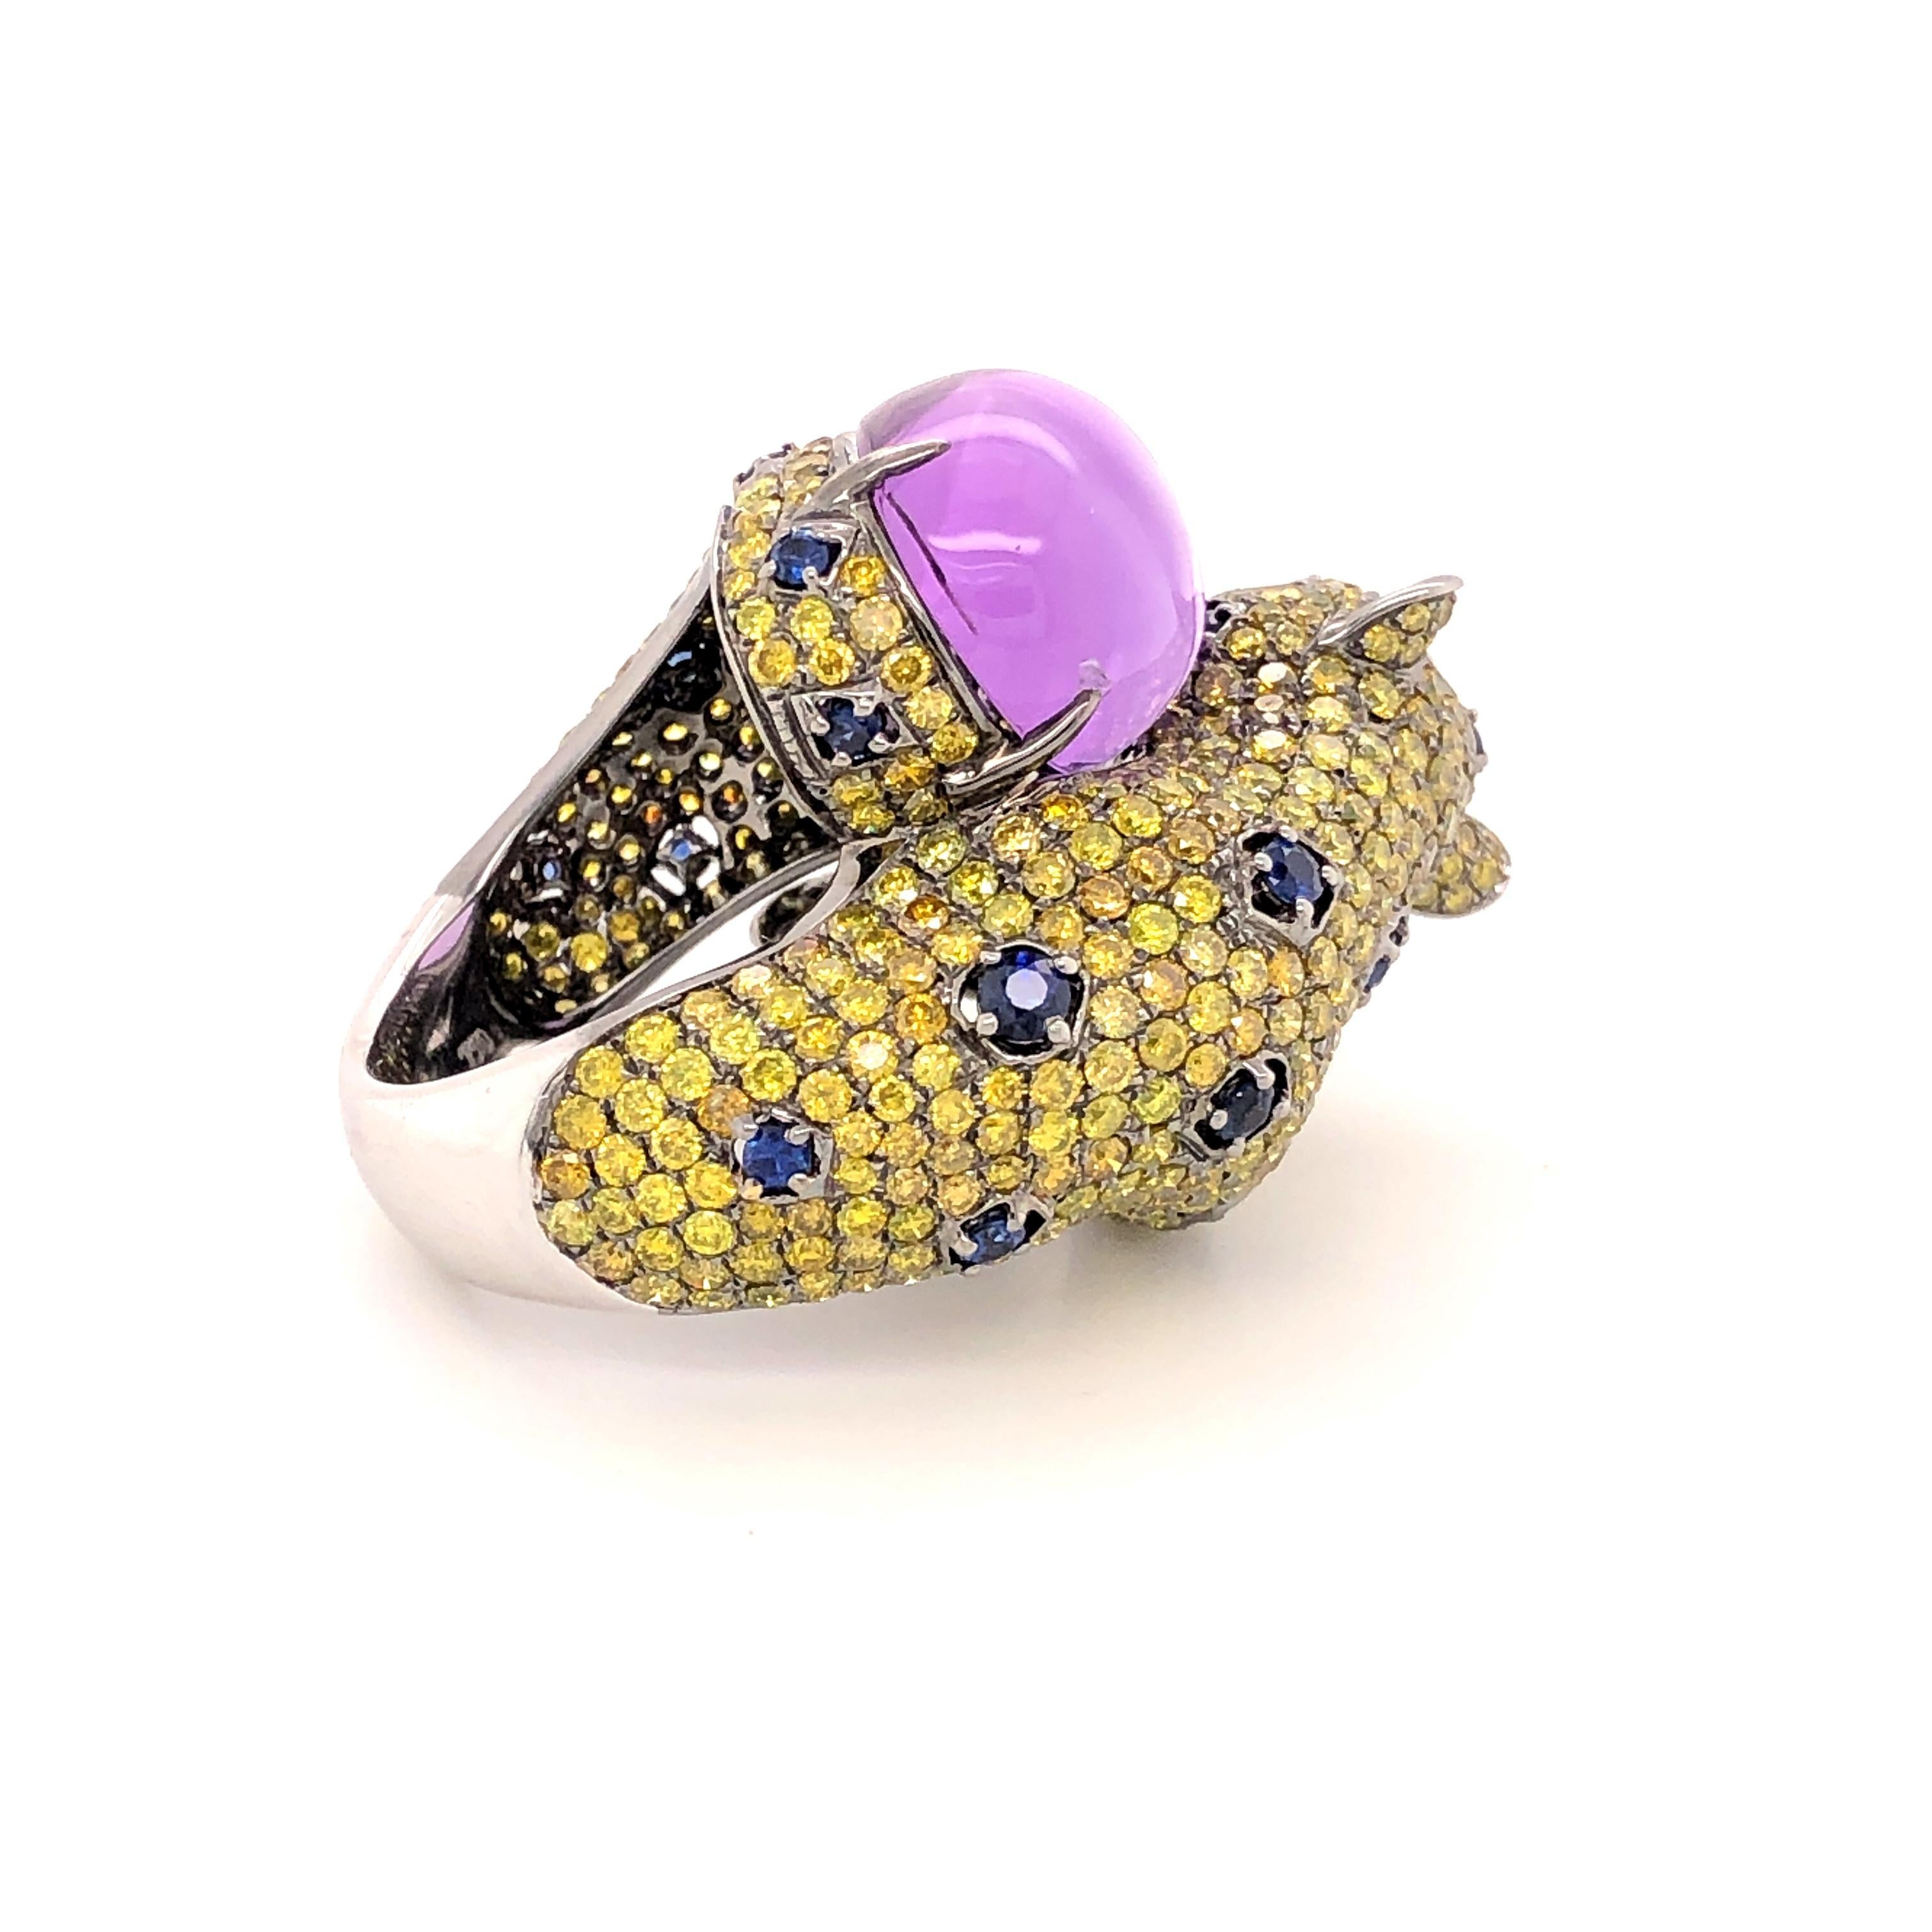 Cabochon Amethyst Protector Yellow Diamonds Cheetah Ring For Sale